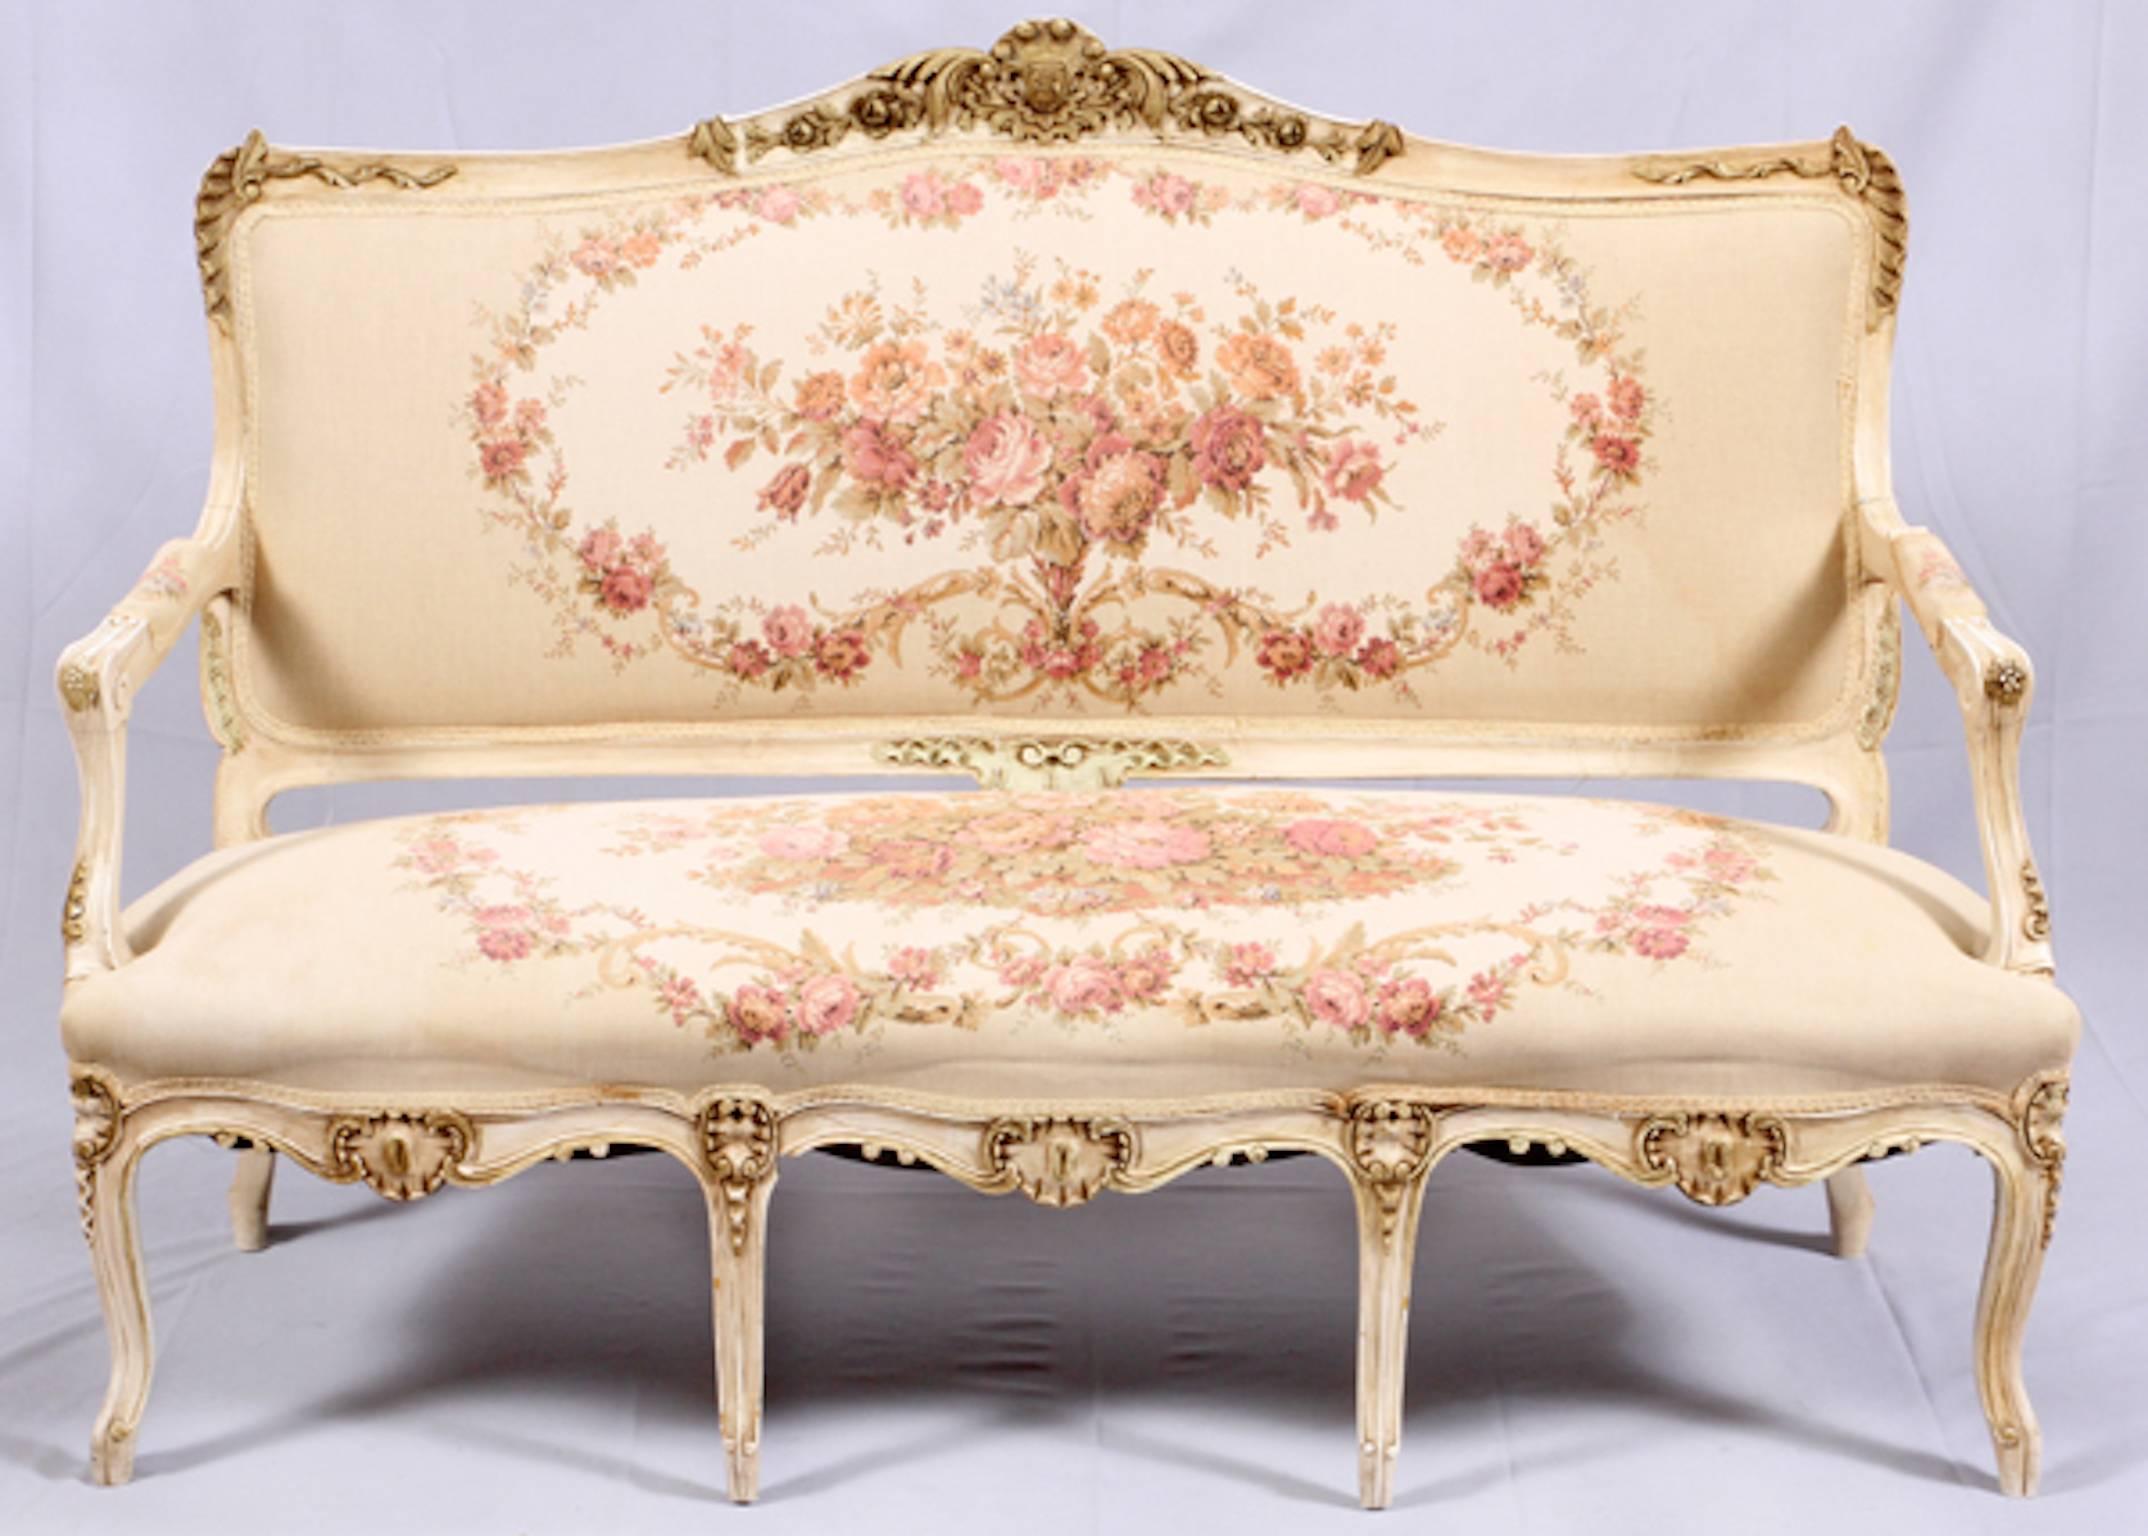 French Louis XV settee and side chairs, three pieces French sofa and side chairs having tapestry upholstery with pink floral medallions on the seats and back cushions. Carved crests with acanthus leaf designs on the frames on all three pieces. Sofa